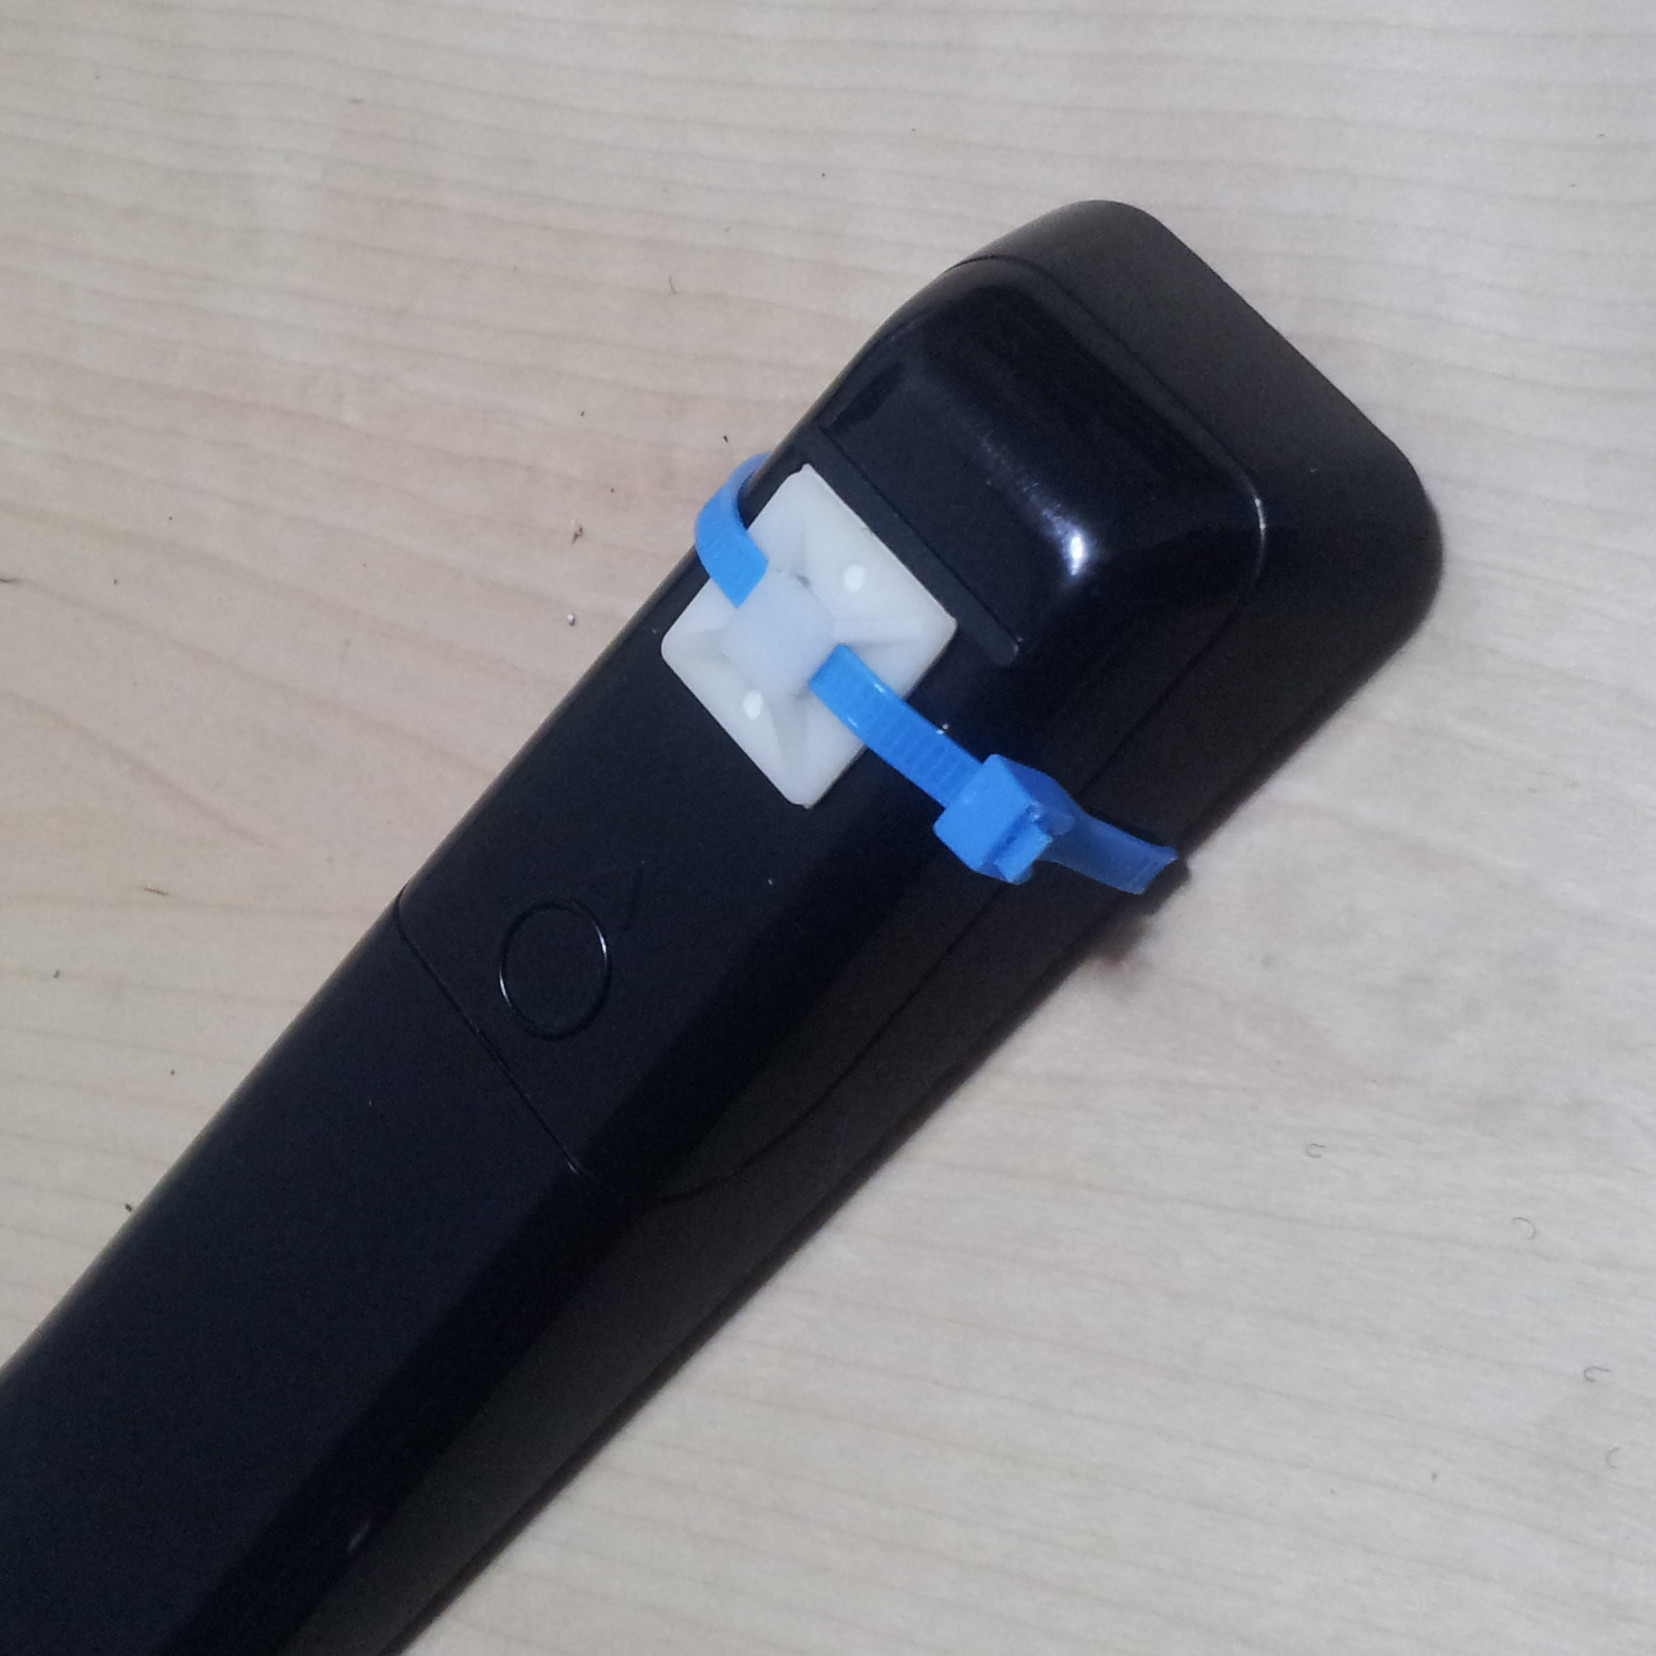 cable tie mount is on the cover. remote still sits upright